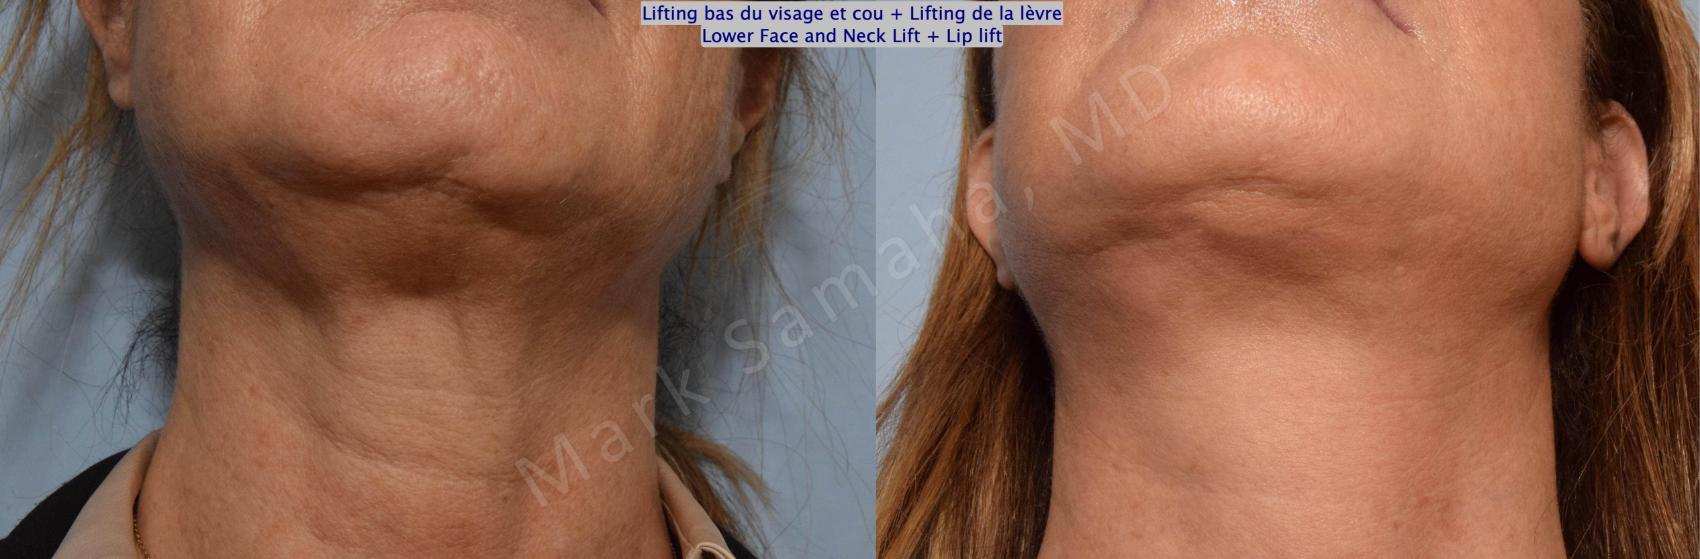 Before & After Lifting du visage / Cou - Facelift / Necklift Case 151 Basal View in Montreal, QC